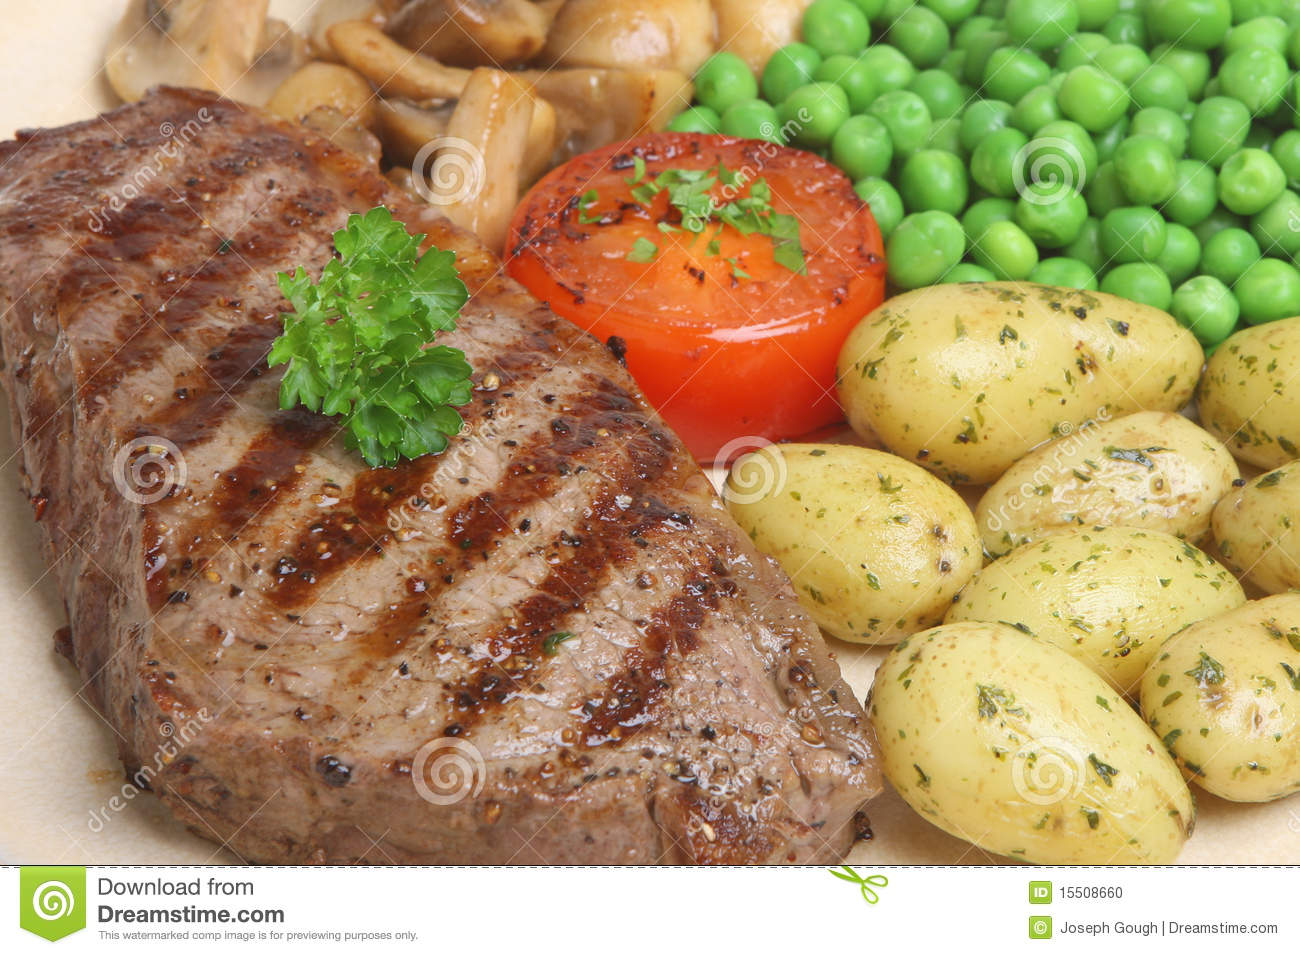 More Similar Stock Images Of   Sirloin Steak With New Potatoes  